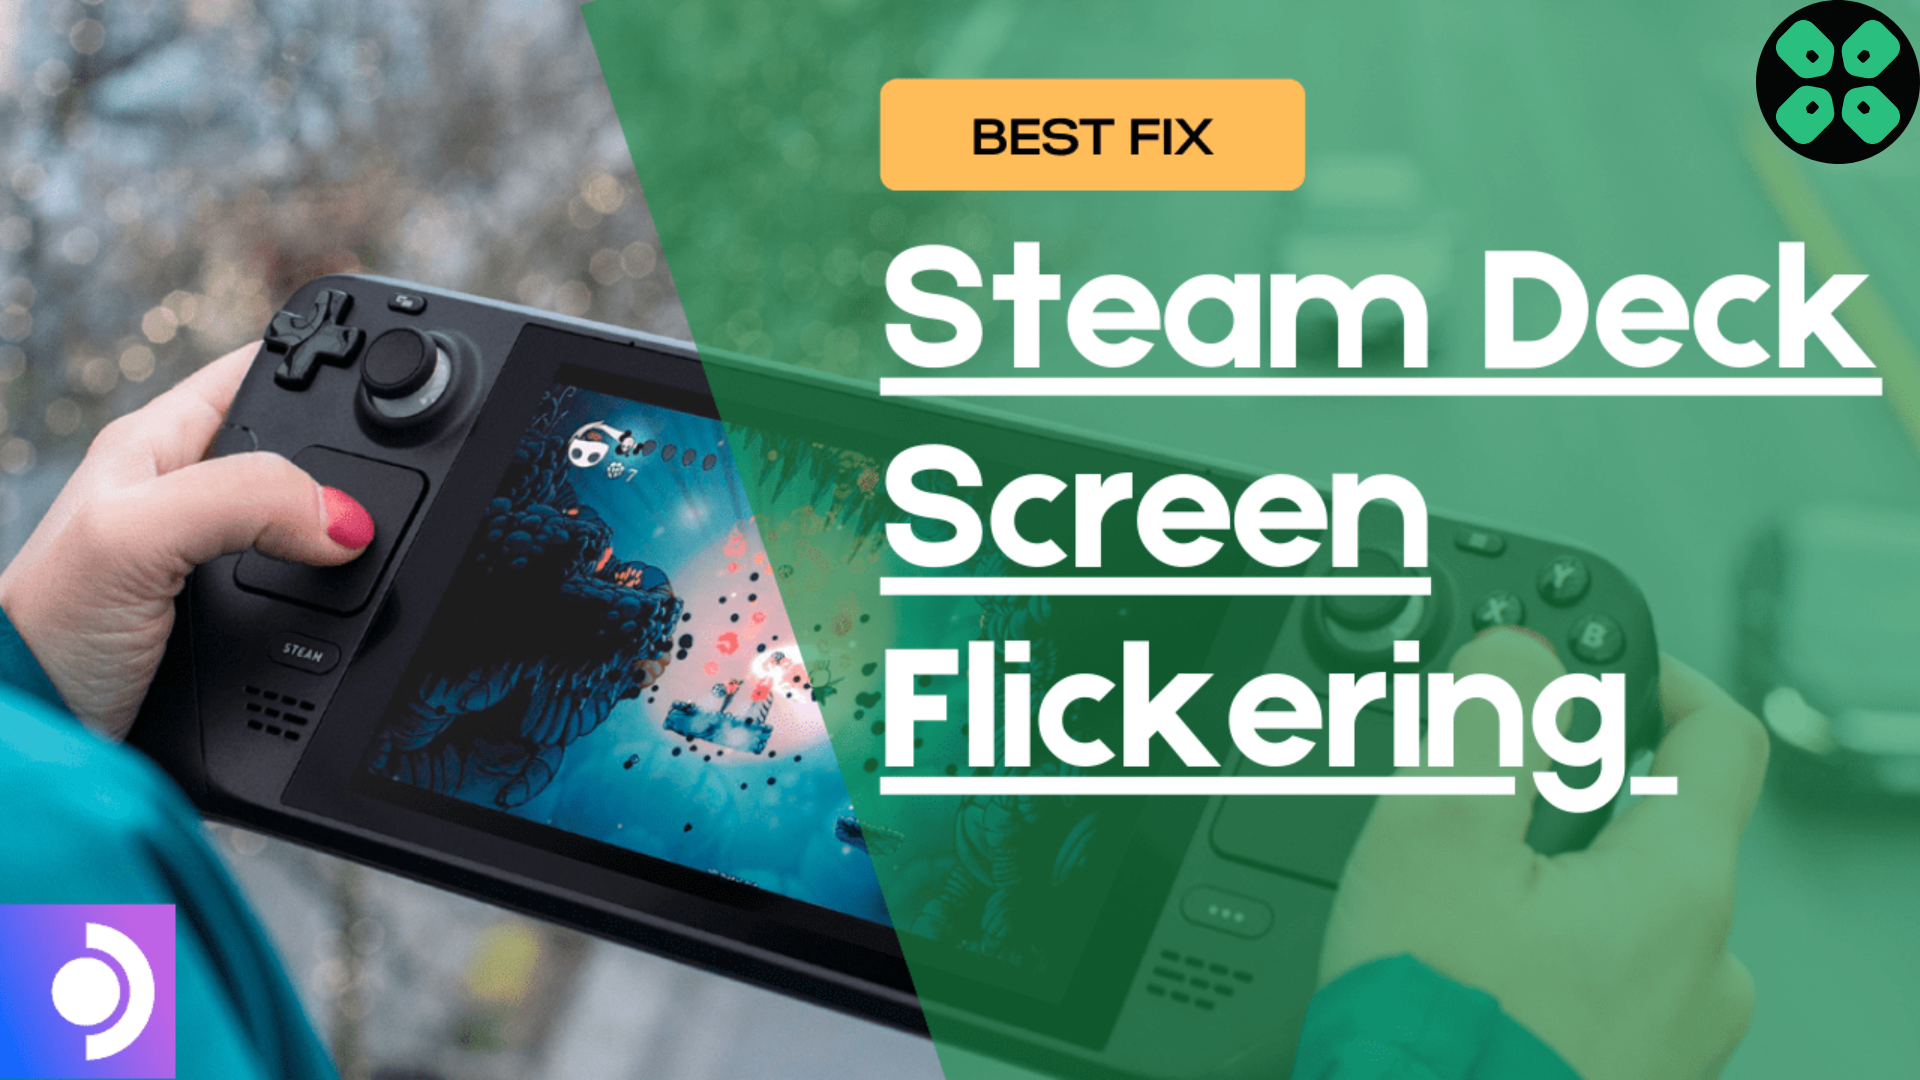 How to Fix Steam Deck Screen Flickering Issue